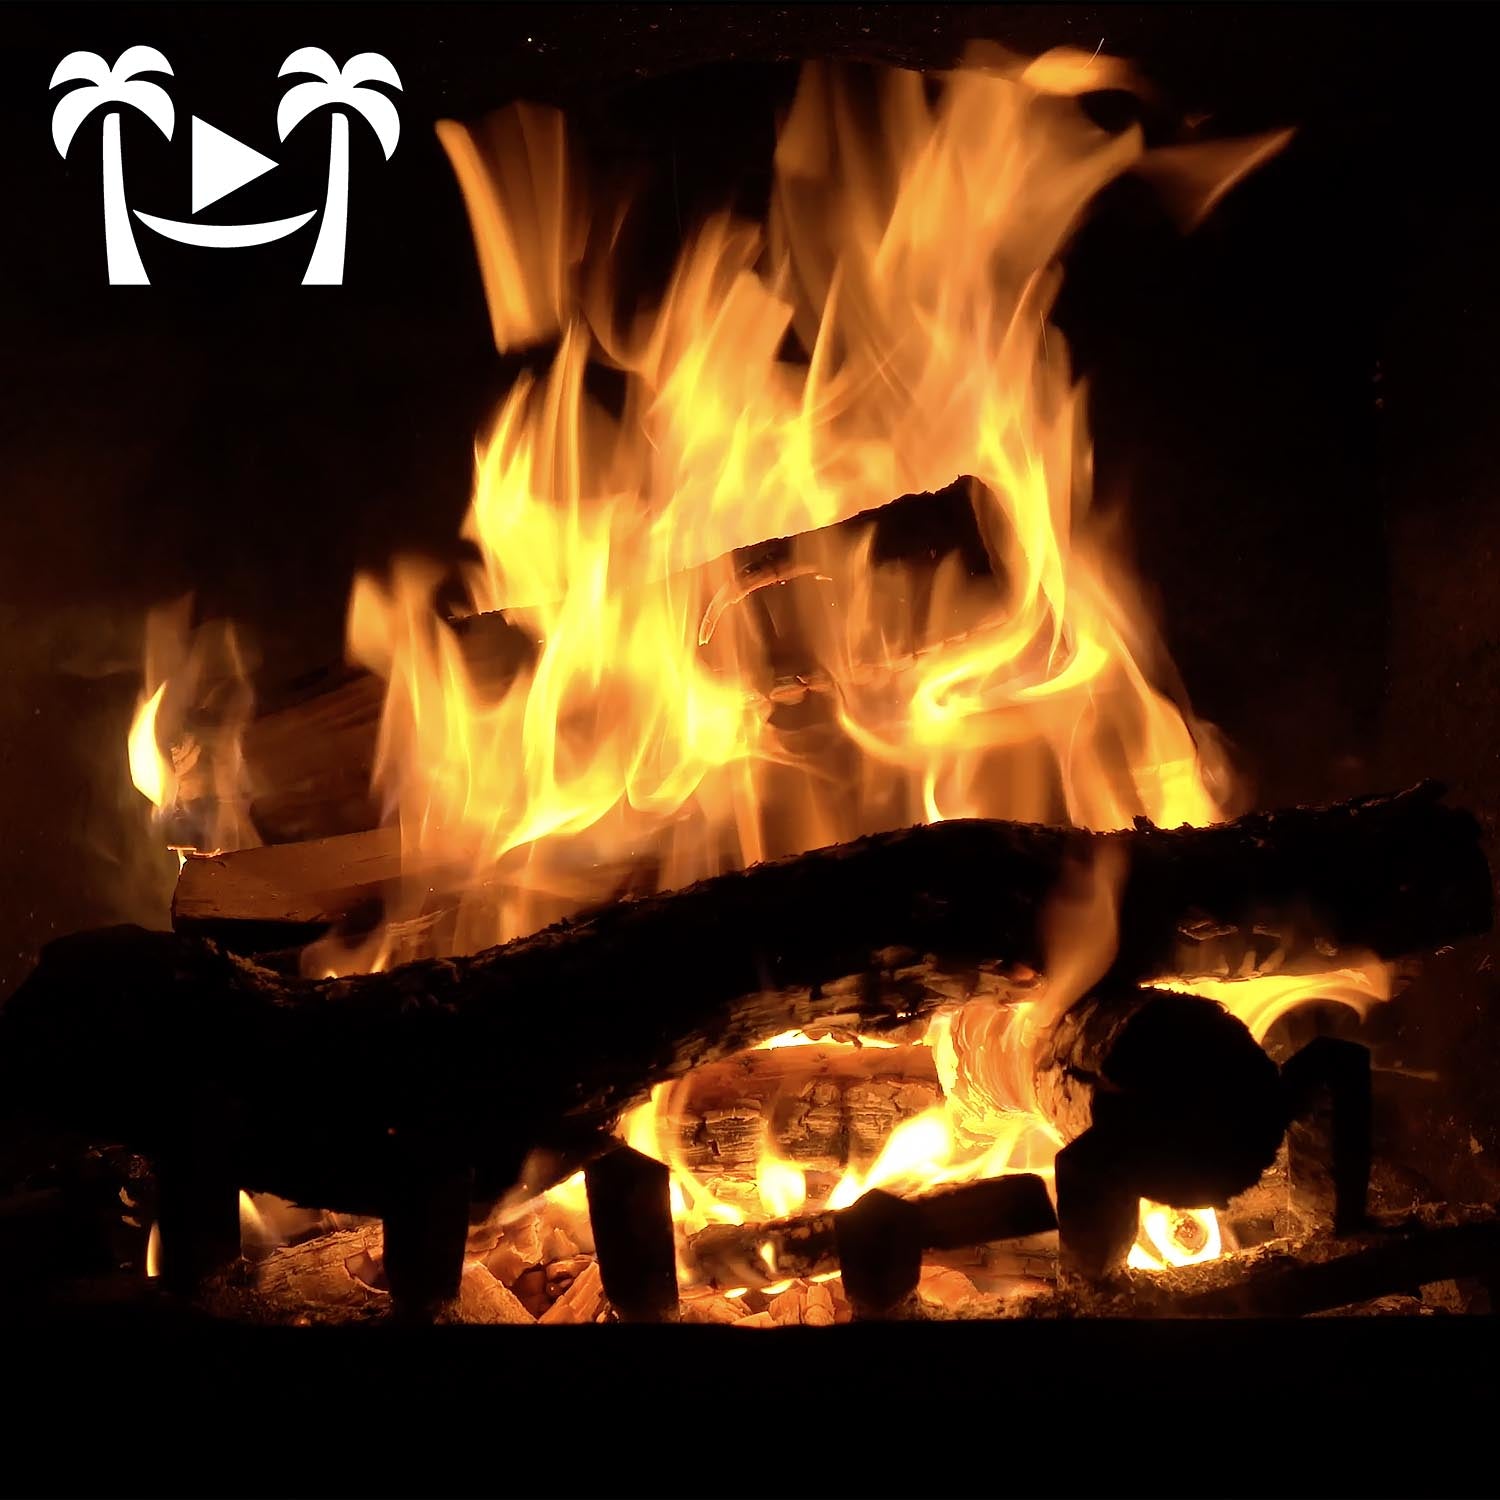 4K Crackling Fireplace Video Scene 2 or 4 Hour Screensaver Download –  Nature Relaxation™ Films by David Huting